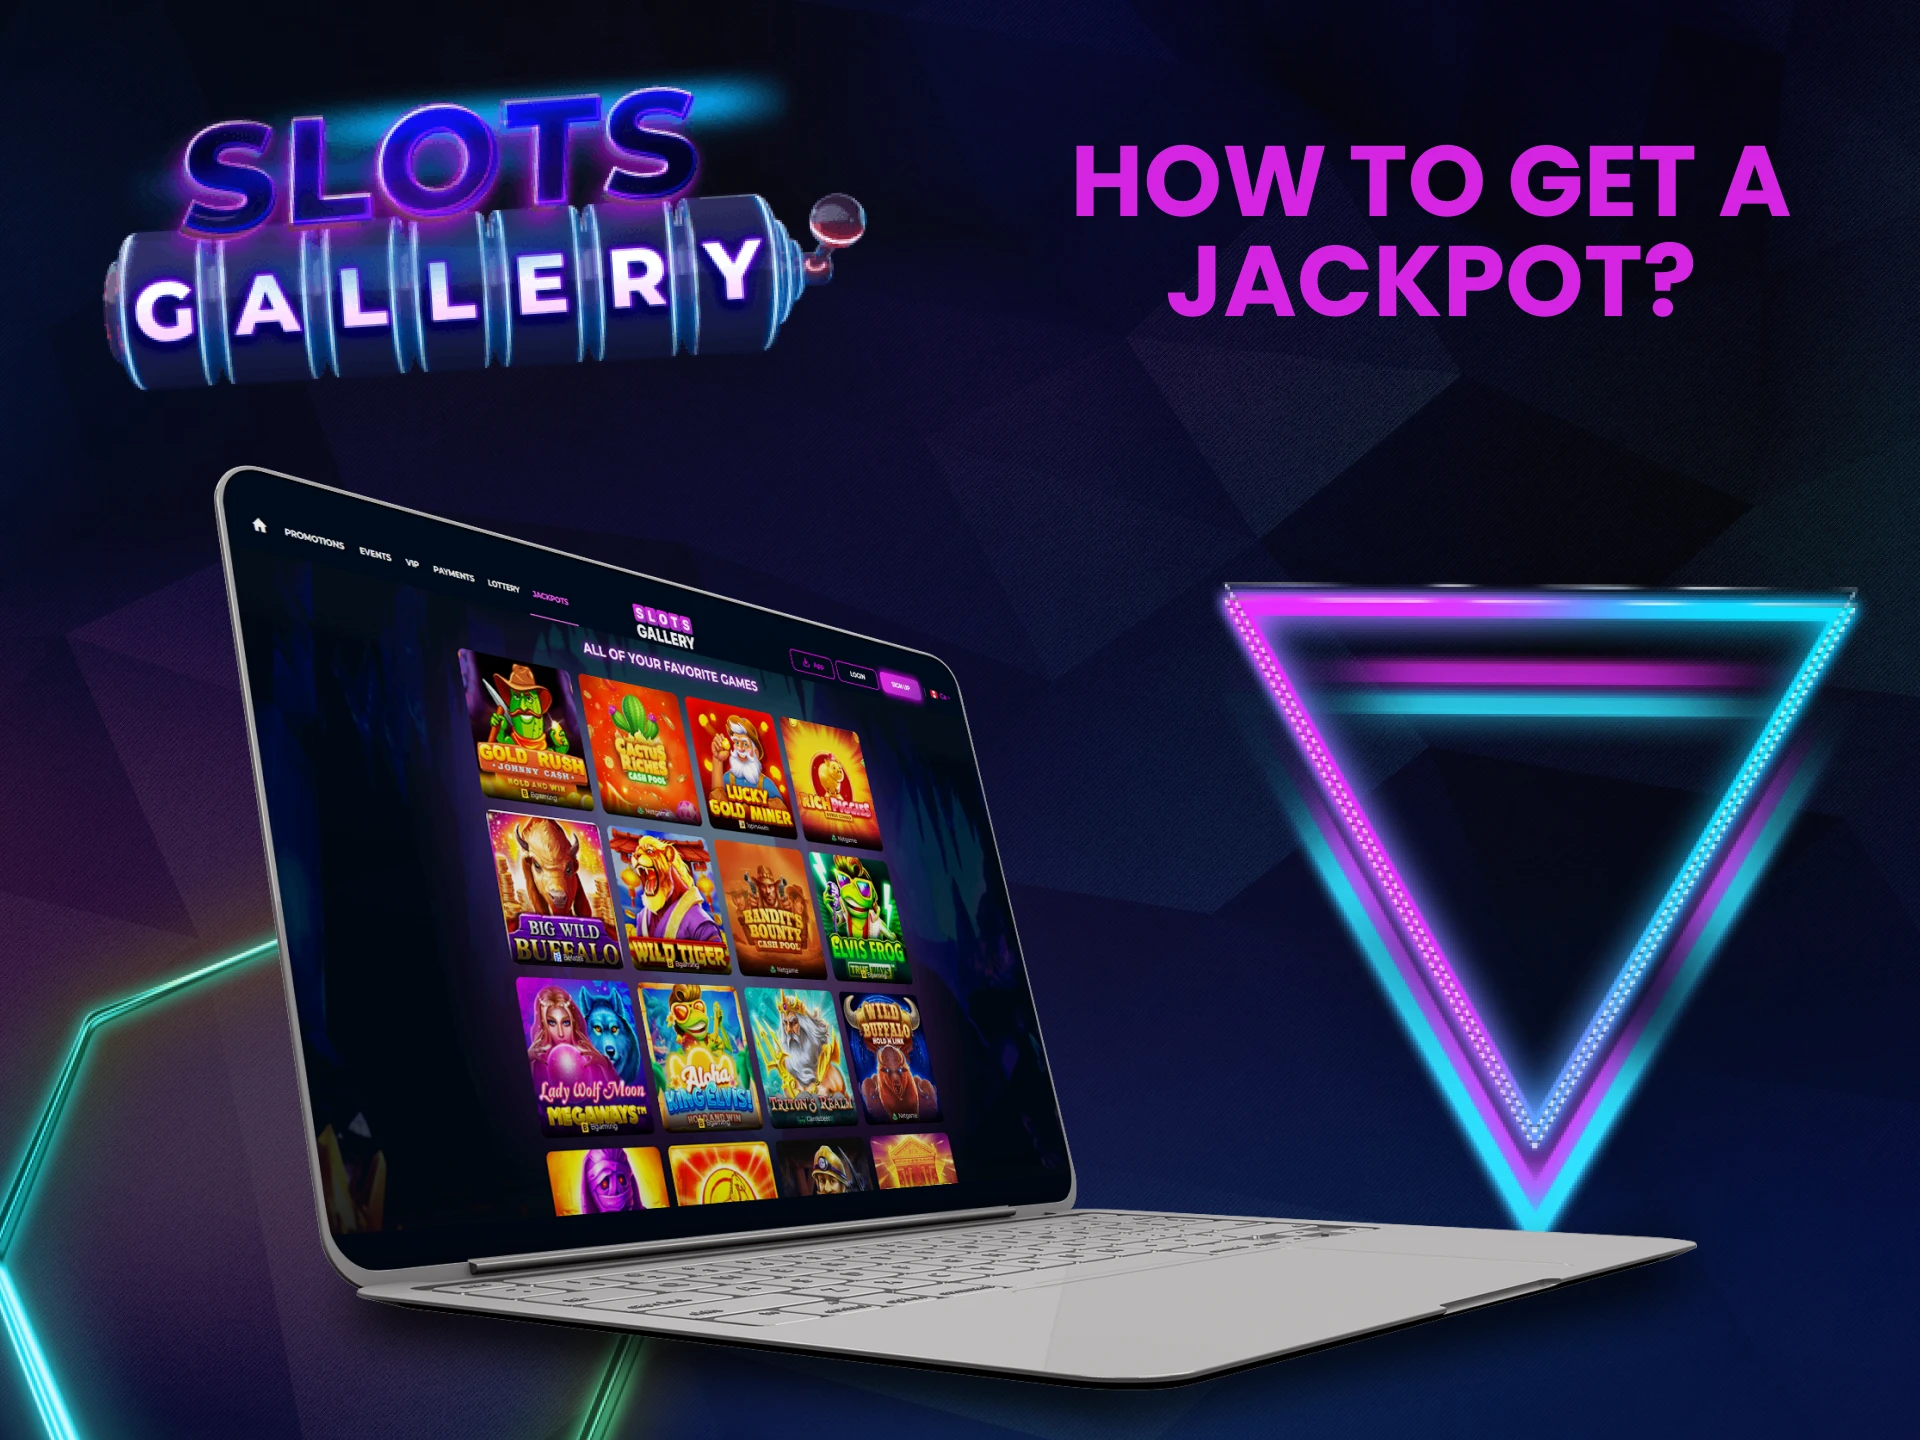 We will tell you how to get the jackpot at Slots Gallery.